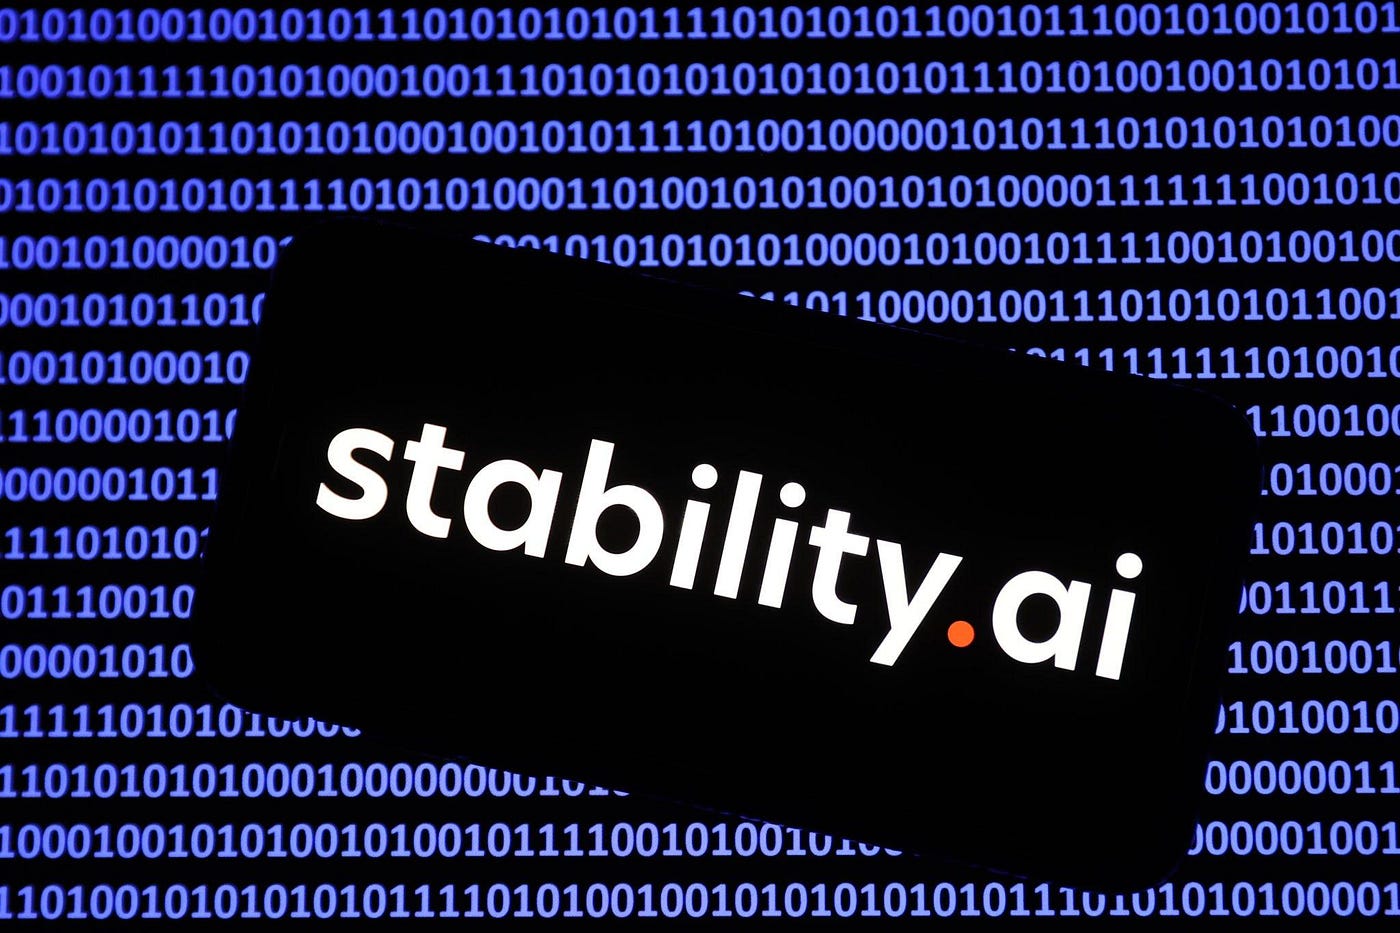 stability-ai-introduces-stable-video-diffusion-an-ai-model-for-video-generation